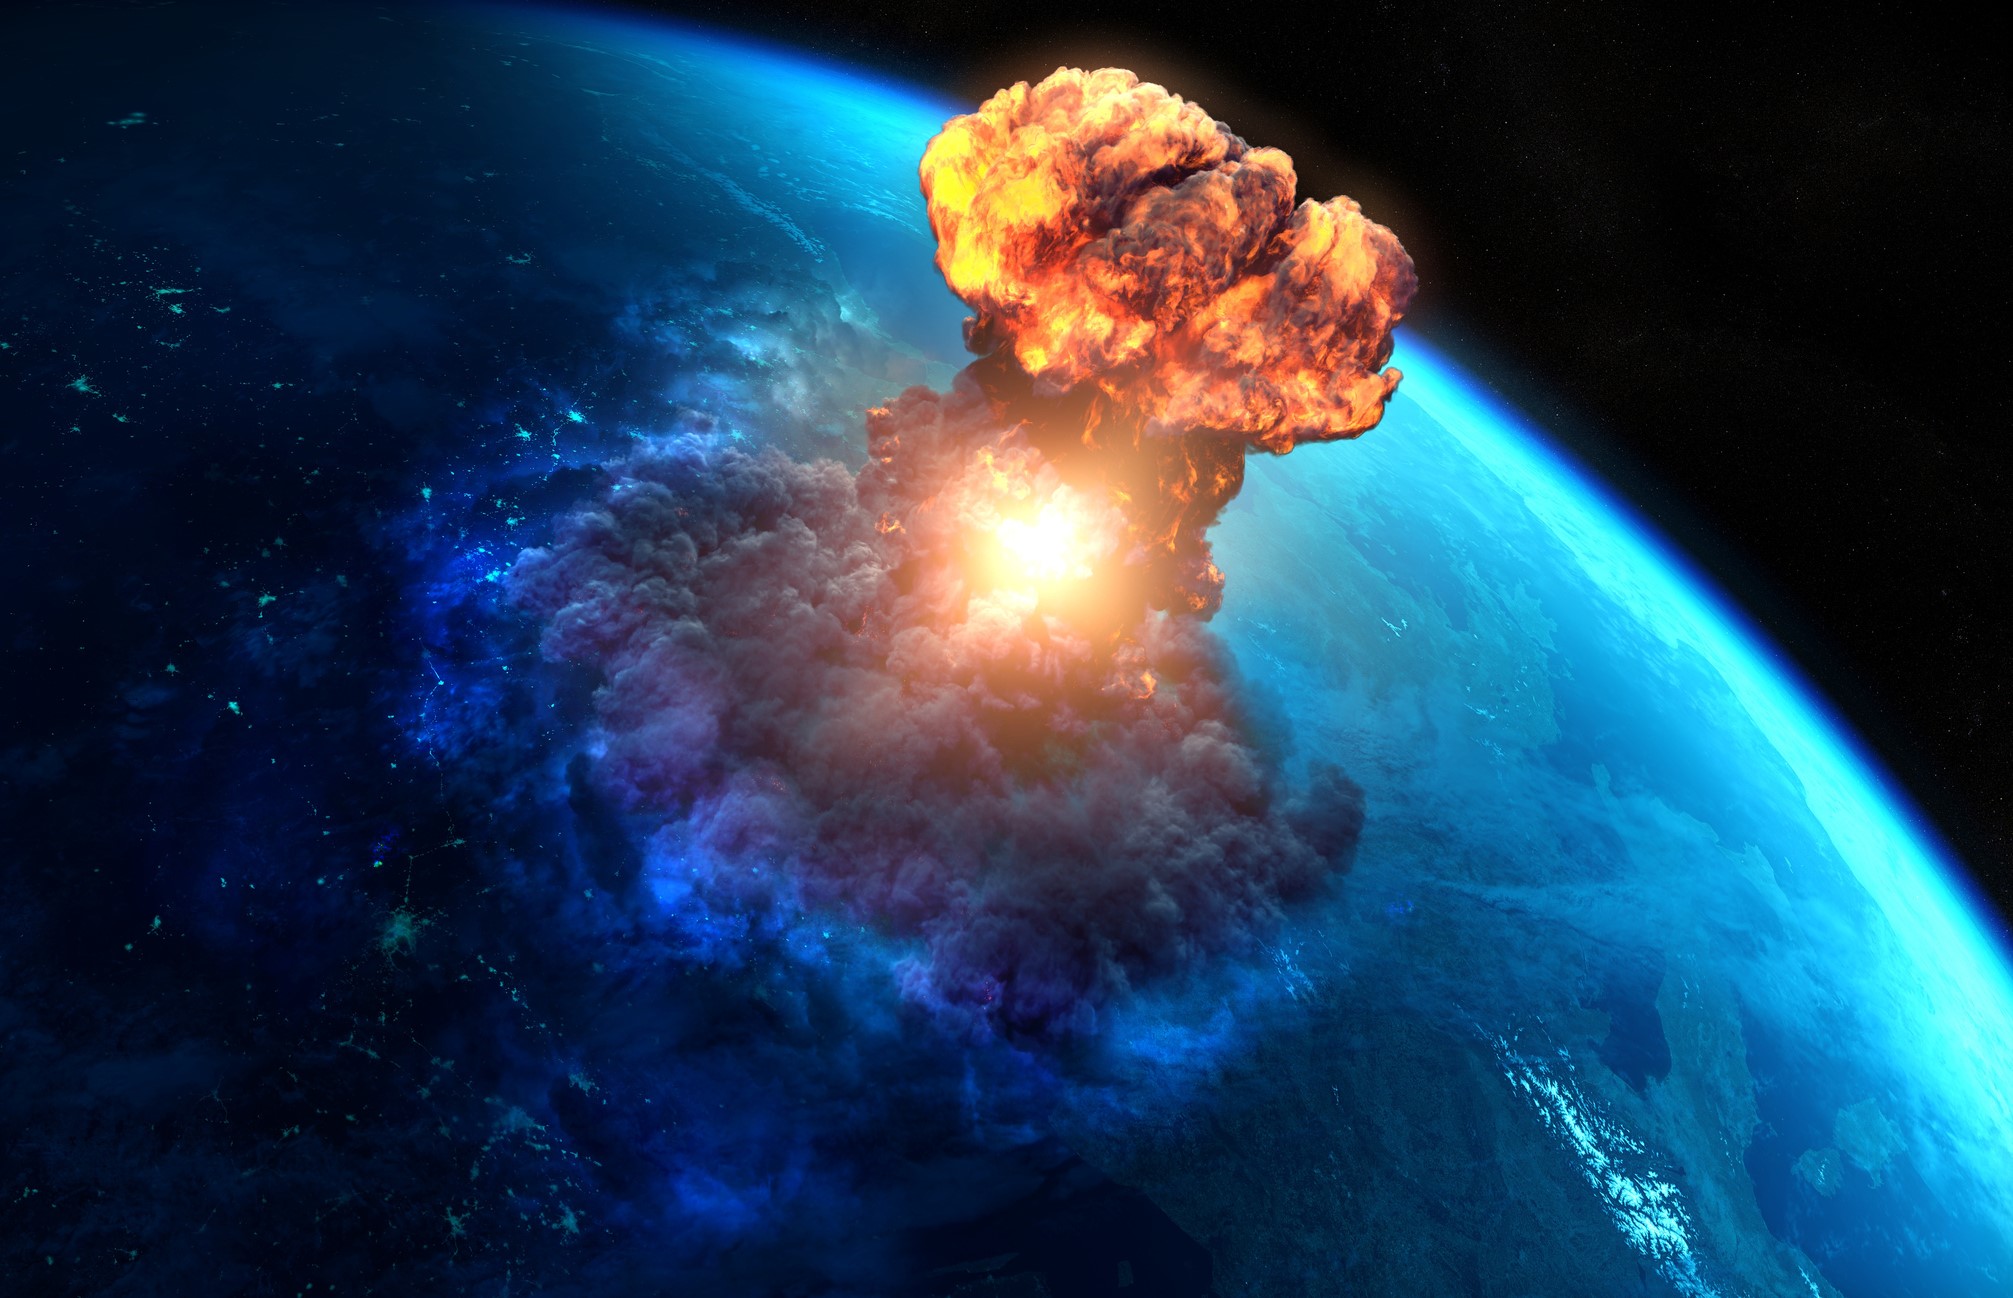 Will the World End in Nuclear—or Climate—Catastrophe?